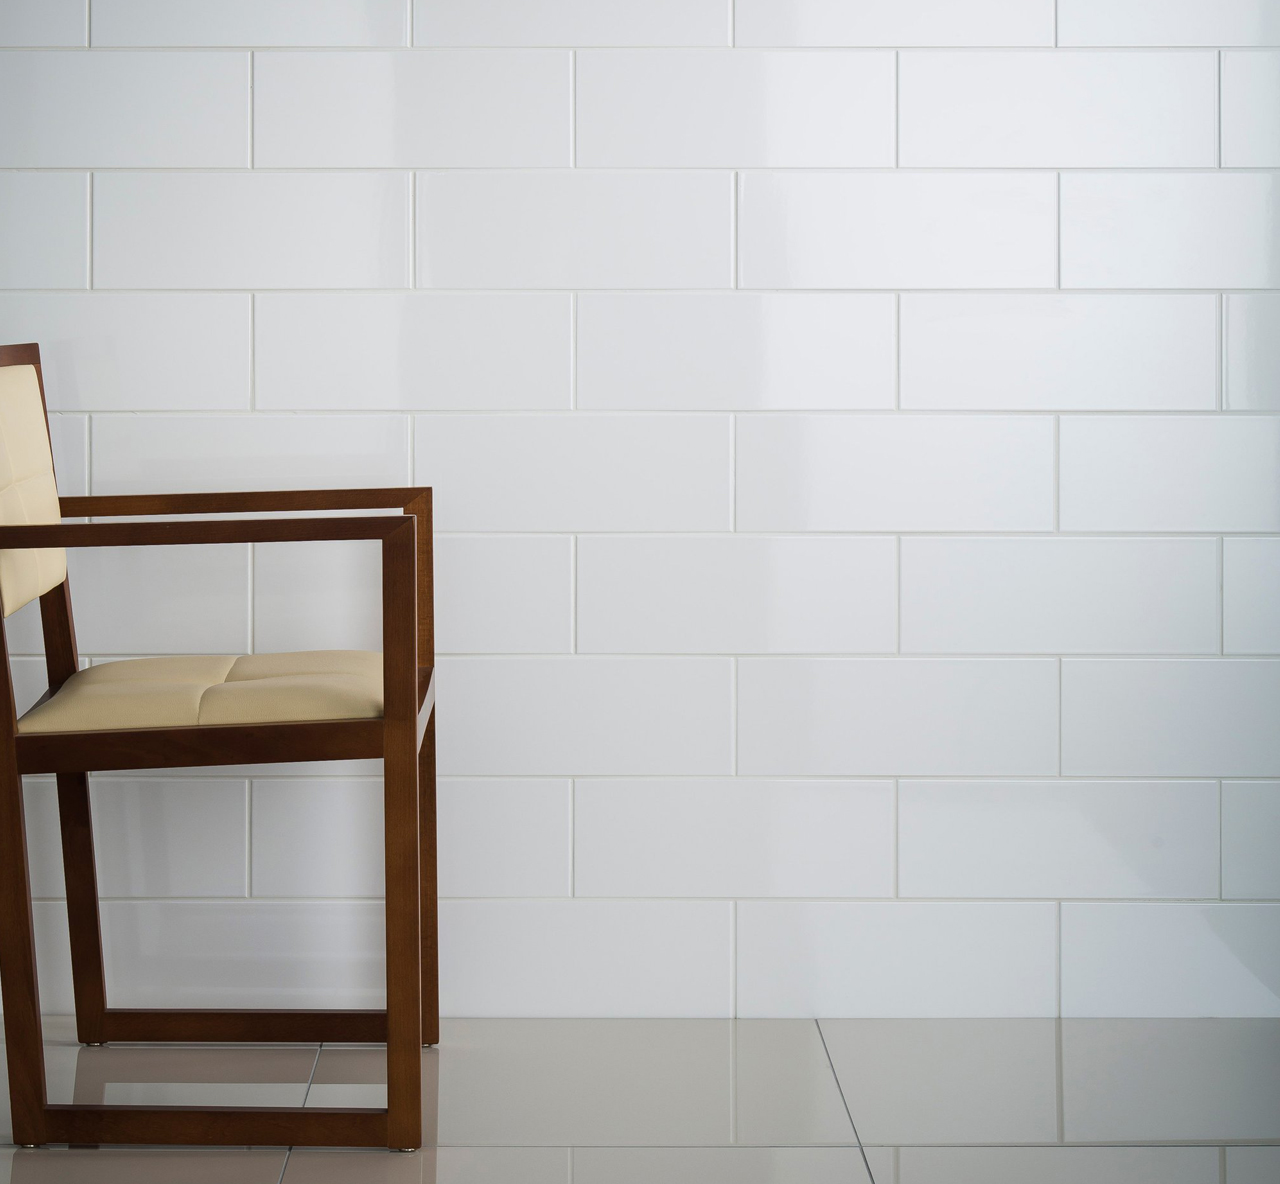 Johnsons Arctic White Gloss Wall Tiles used in a room with a grey floor and a wooden framed chair